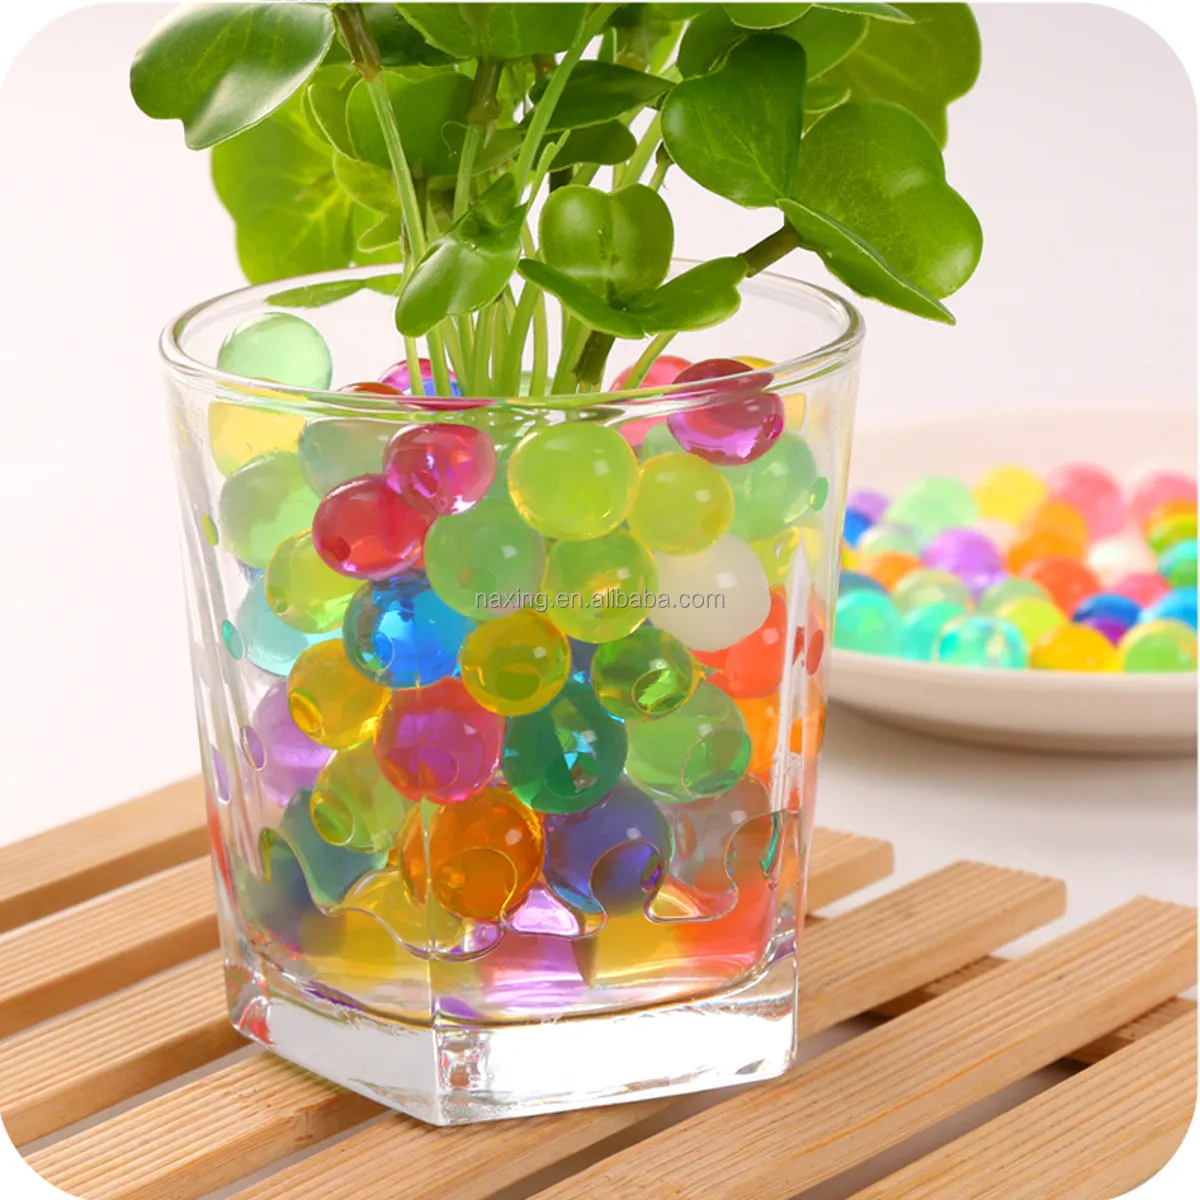 14 colors round shape 7-8mm water gel beads Growing Crystal Soil Water Balls for kids toy